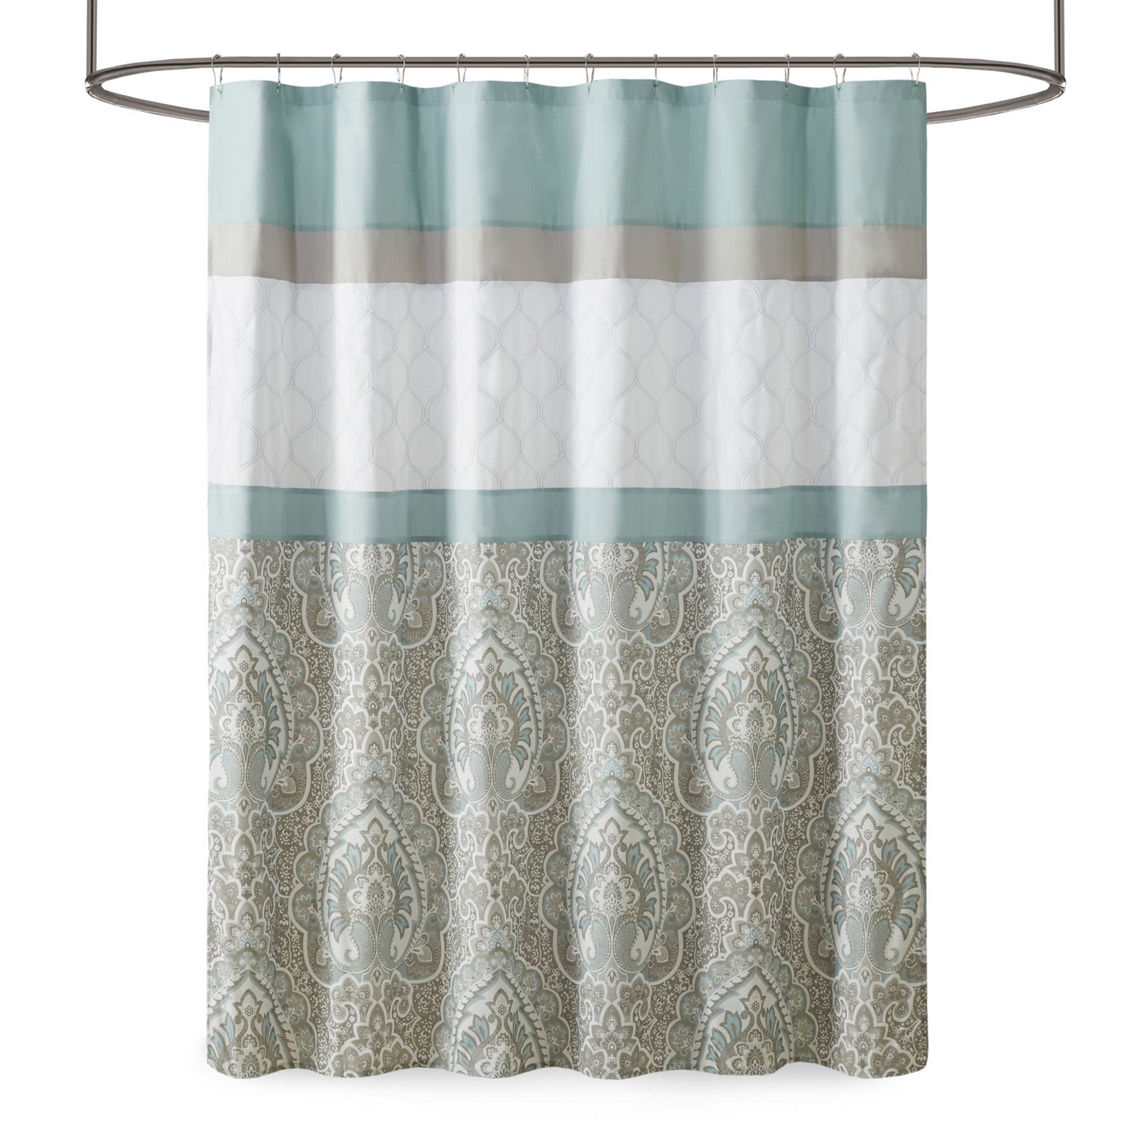 510 Design Josefina Printed and Embroidered Shower Curtain - Image 2 of 4